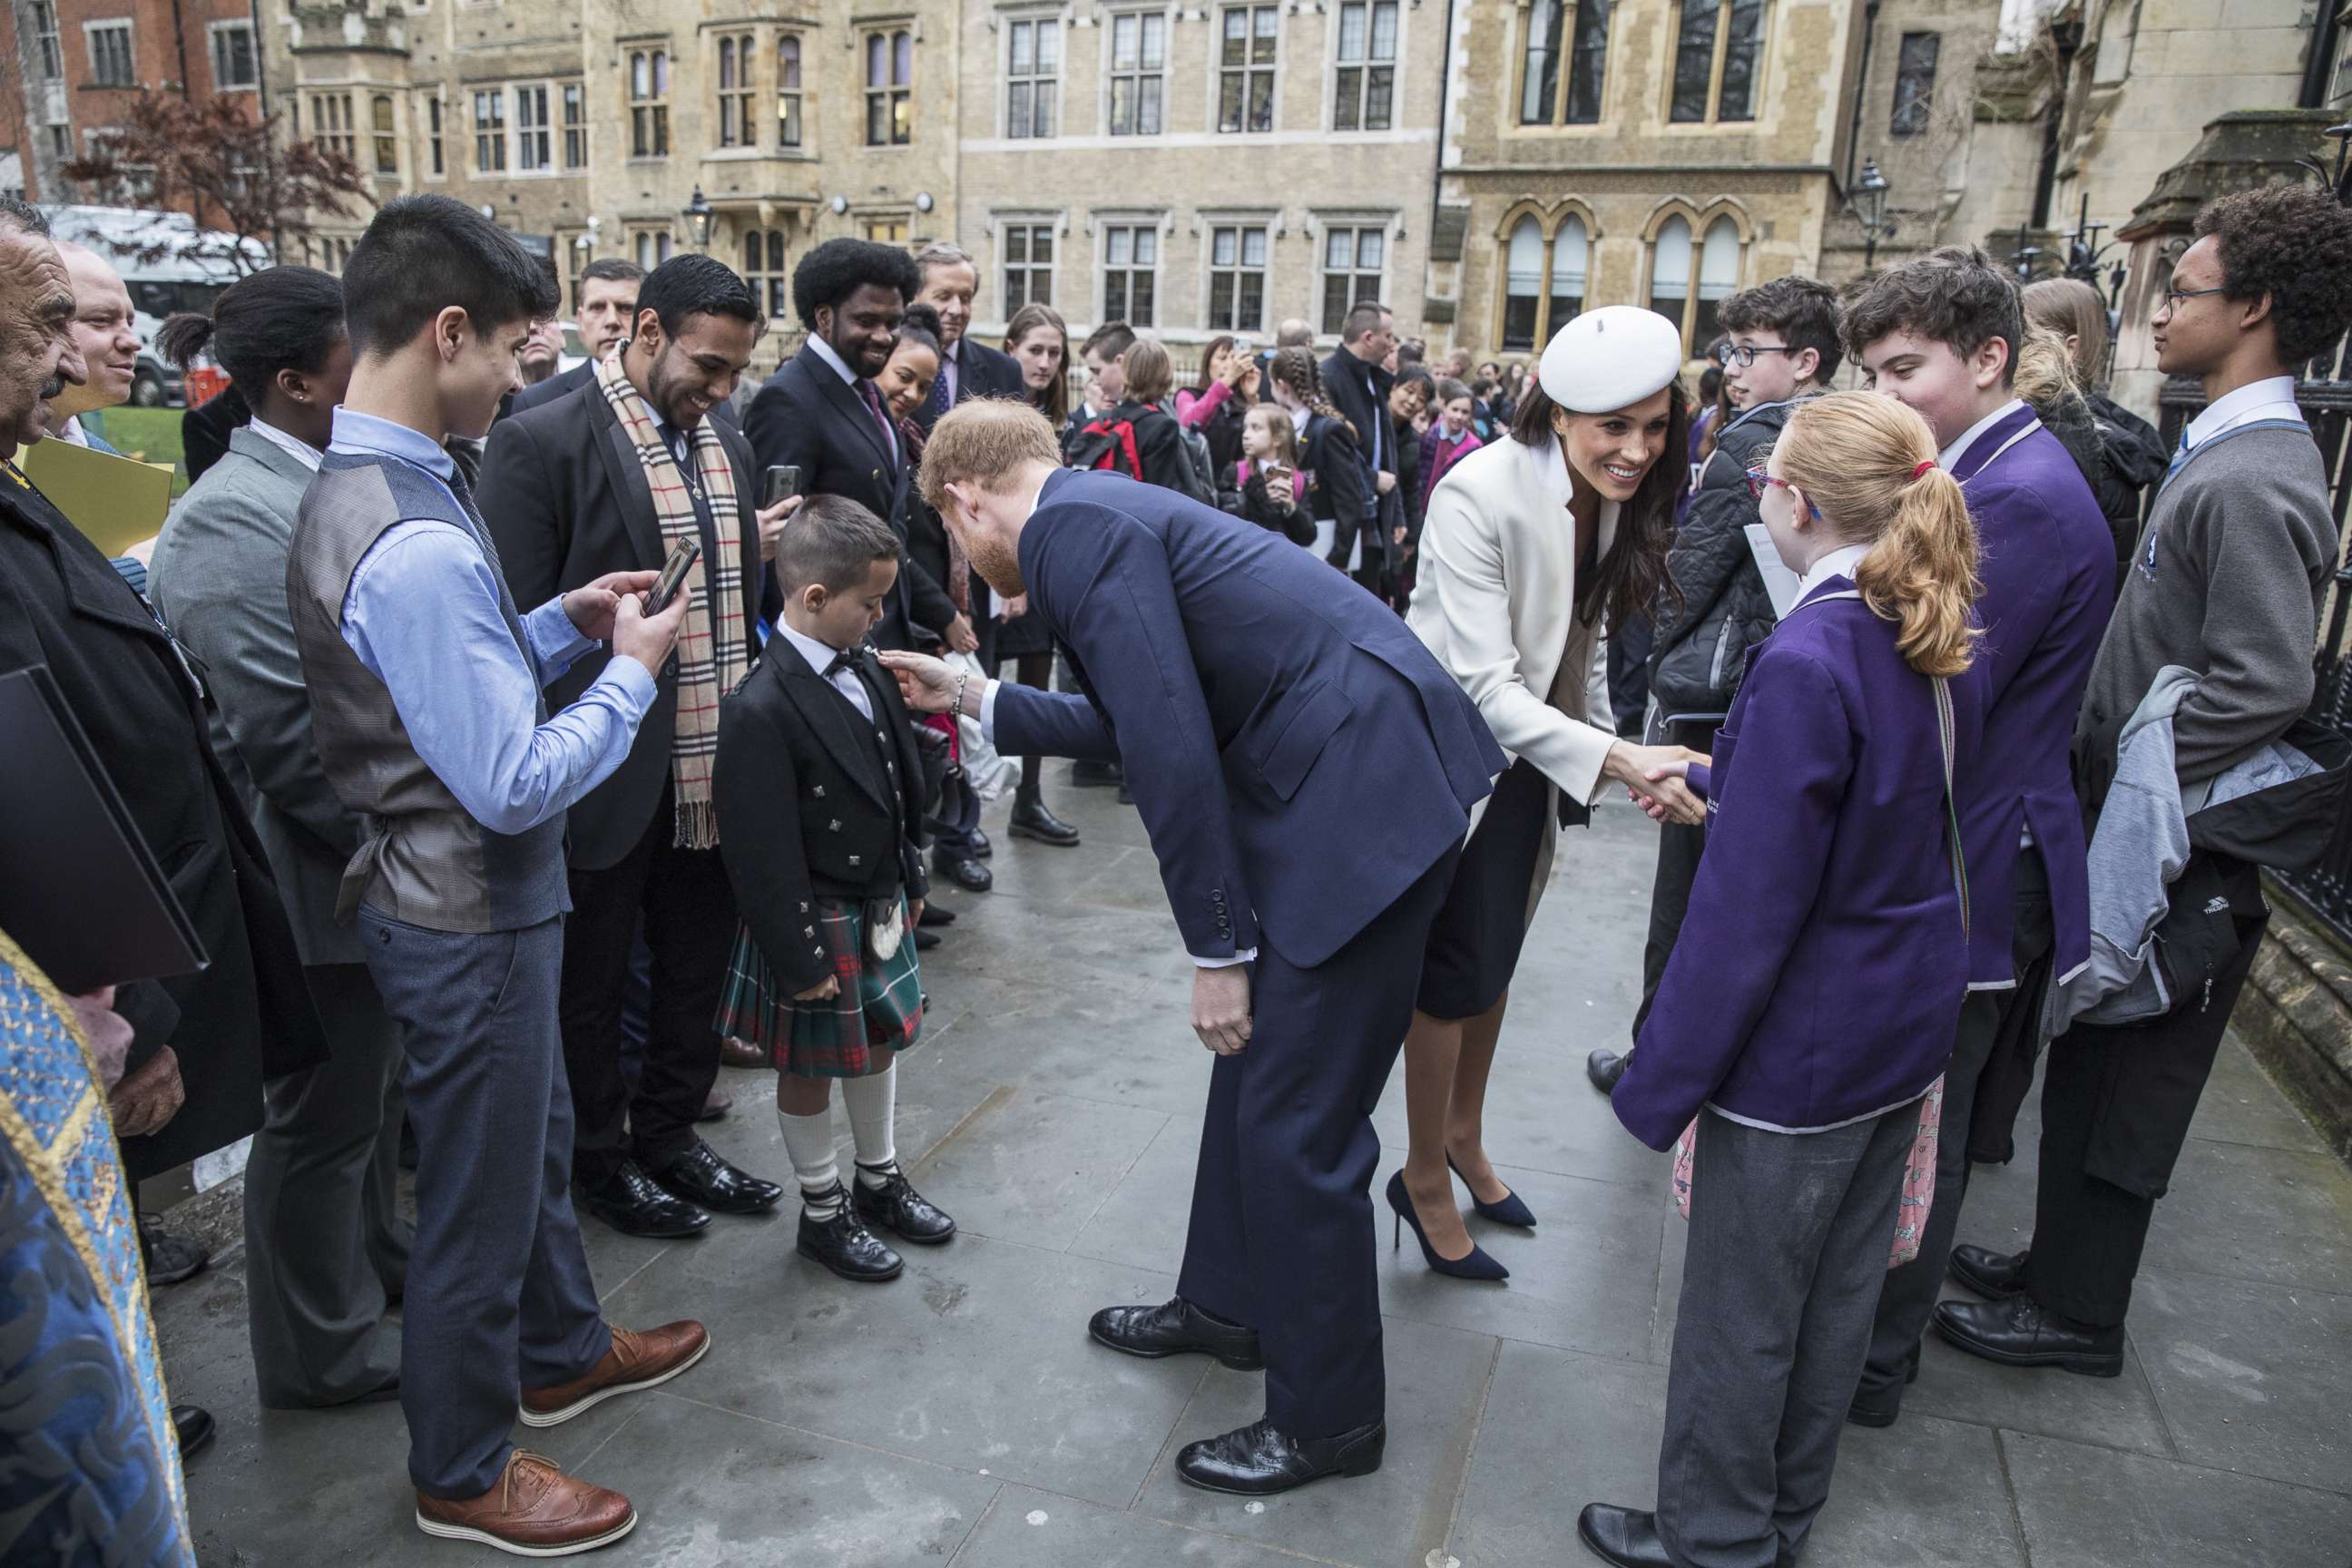 PHOTO: Prince Harry and Meghan Markle meet school children in the Dean's yard before attending a Reception after attending the Commonwealth Service at Westminster Abbey, March 12, 2018, in London.